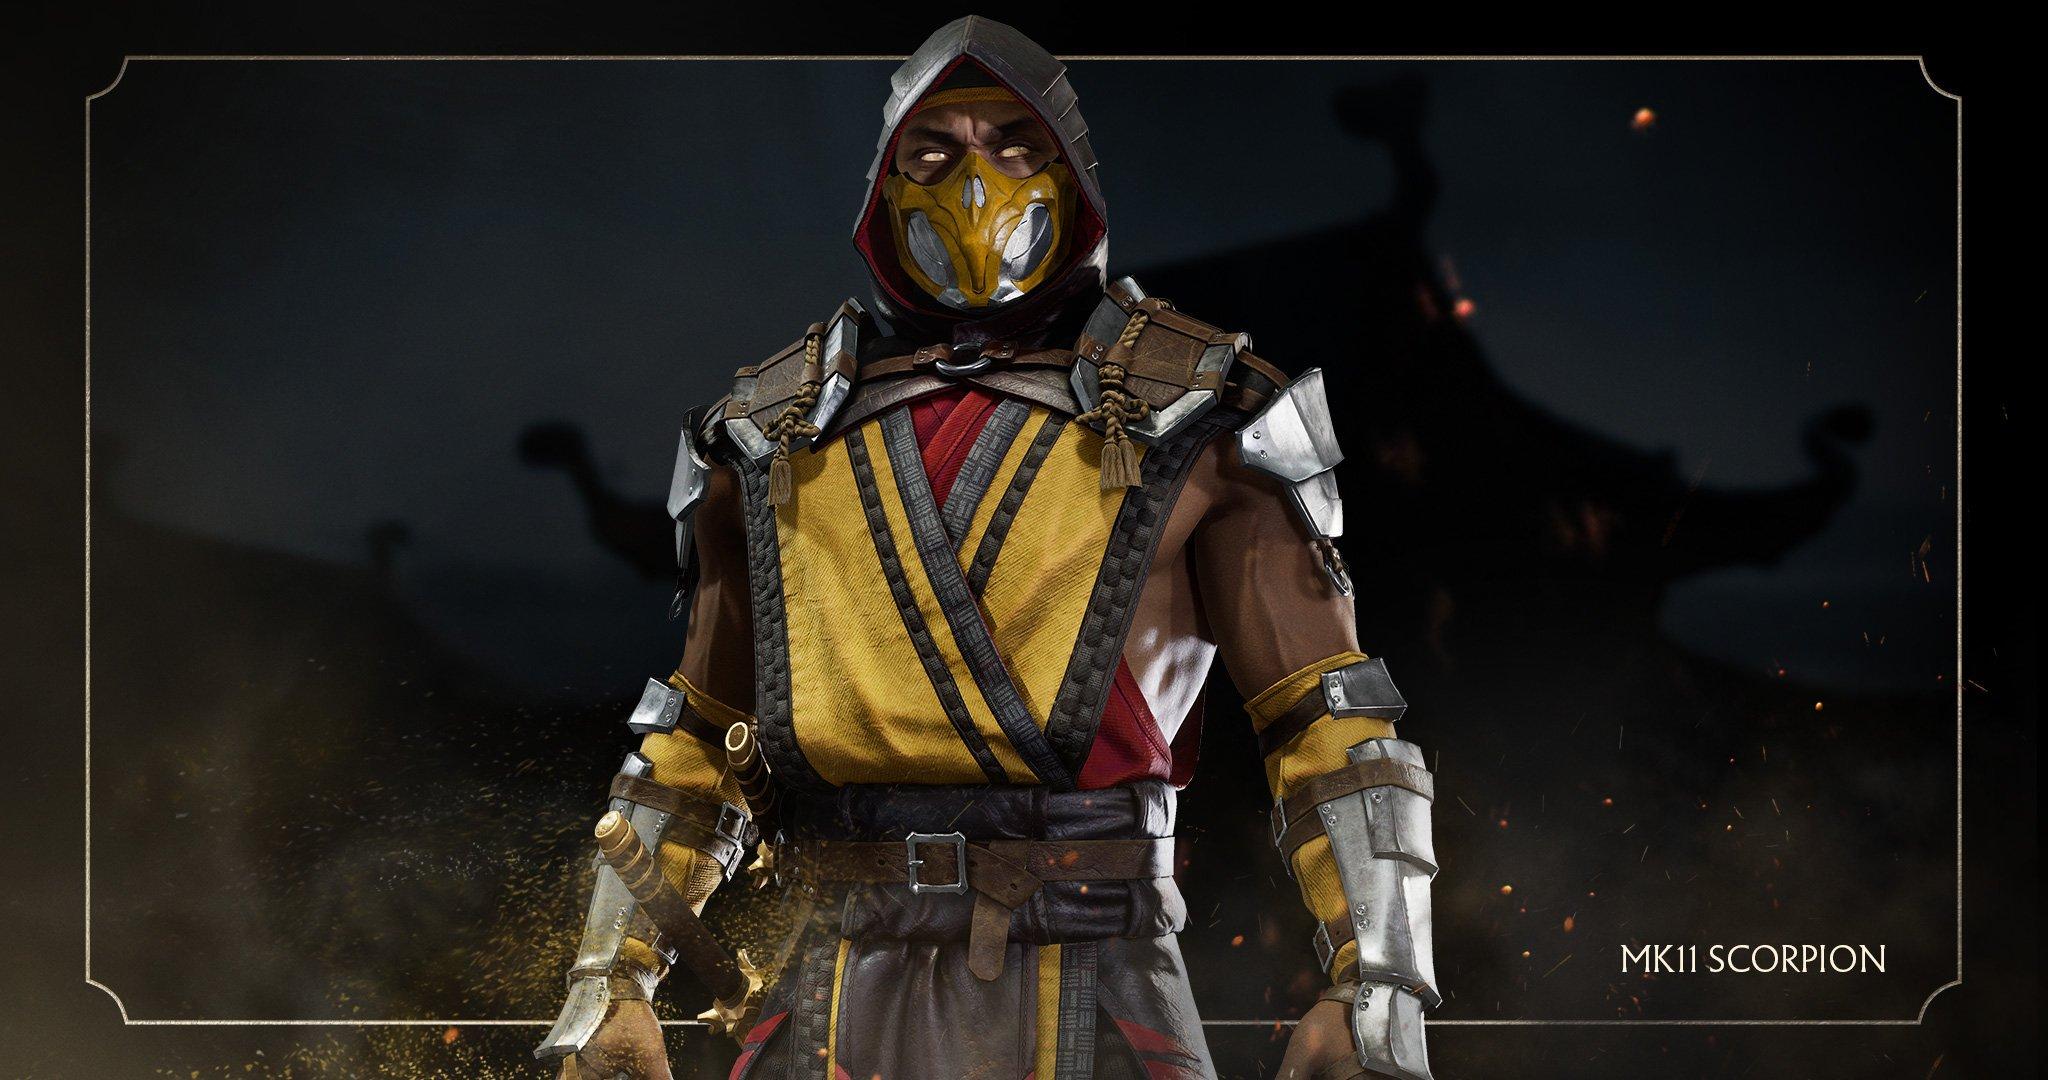 WBGames Support #MK11 characters will be featured